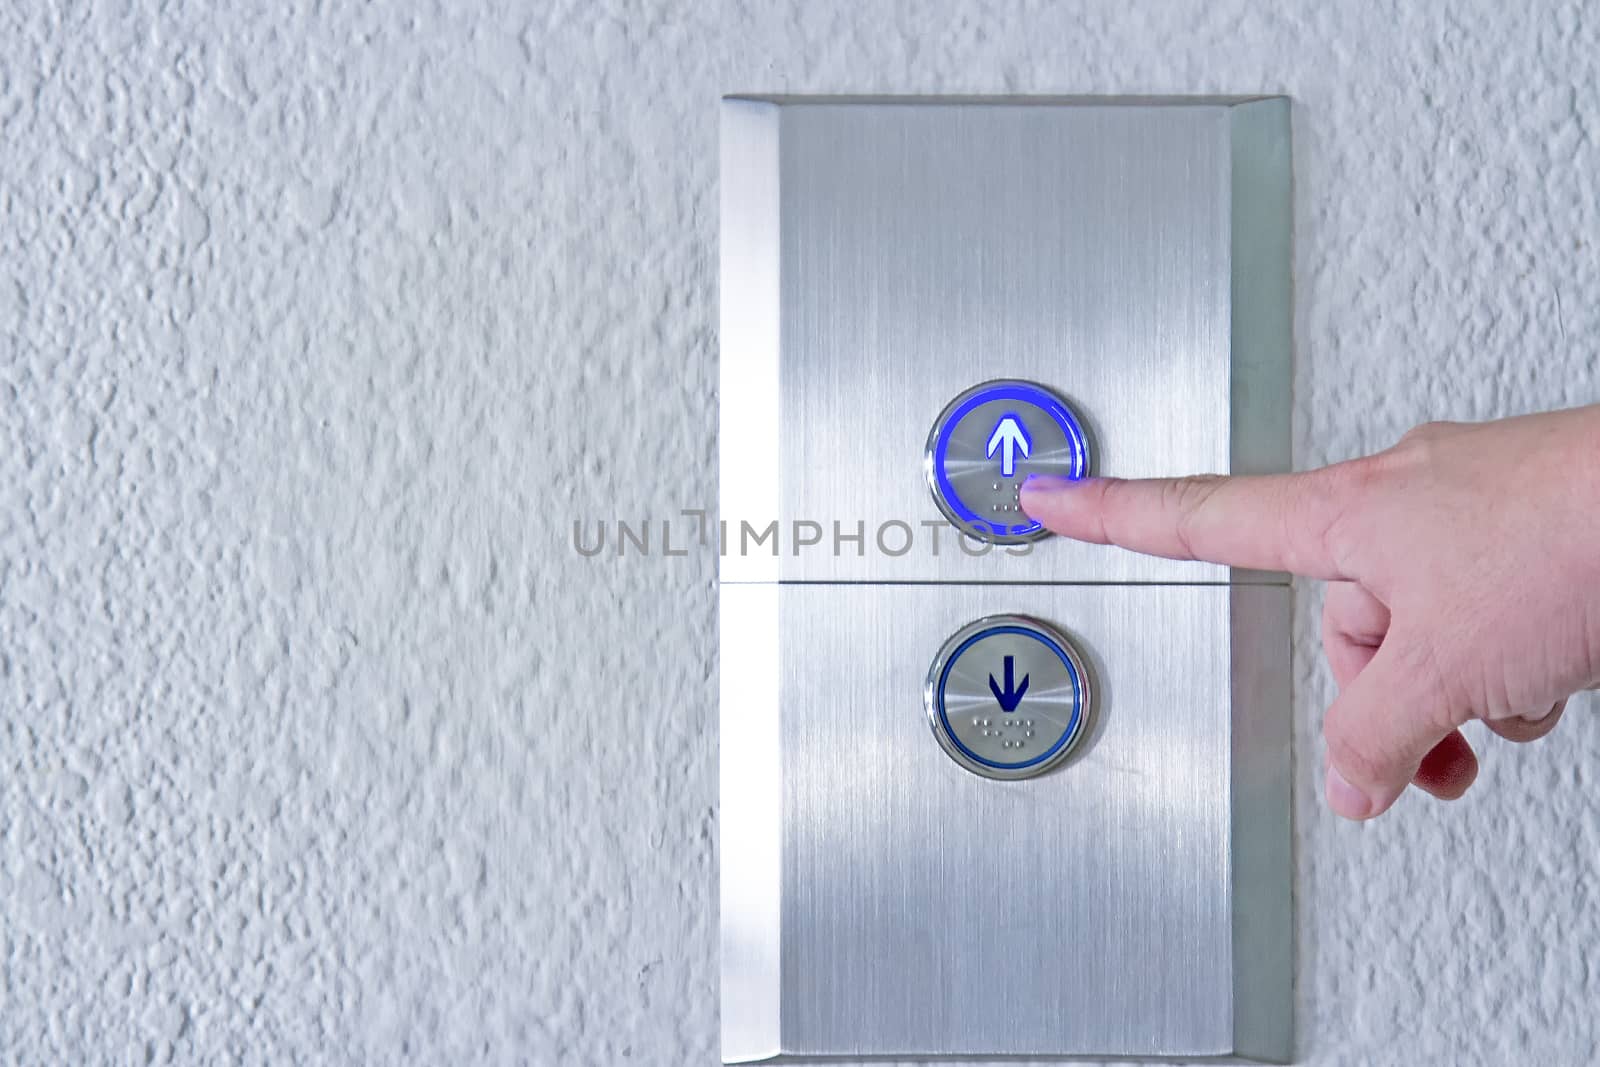 Using hands, press the elevator up and keypad elevator by TakerWalker